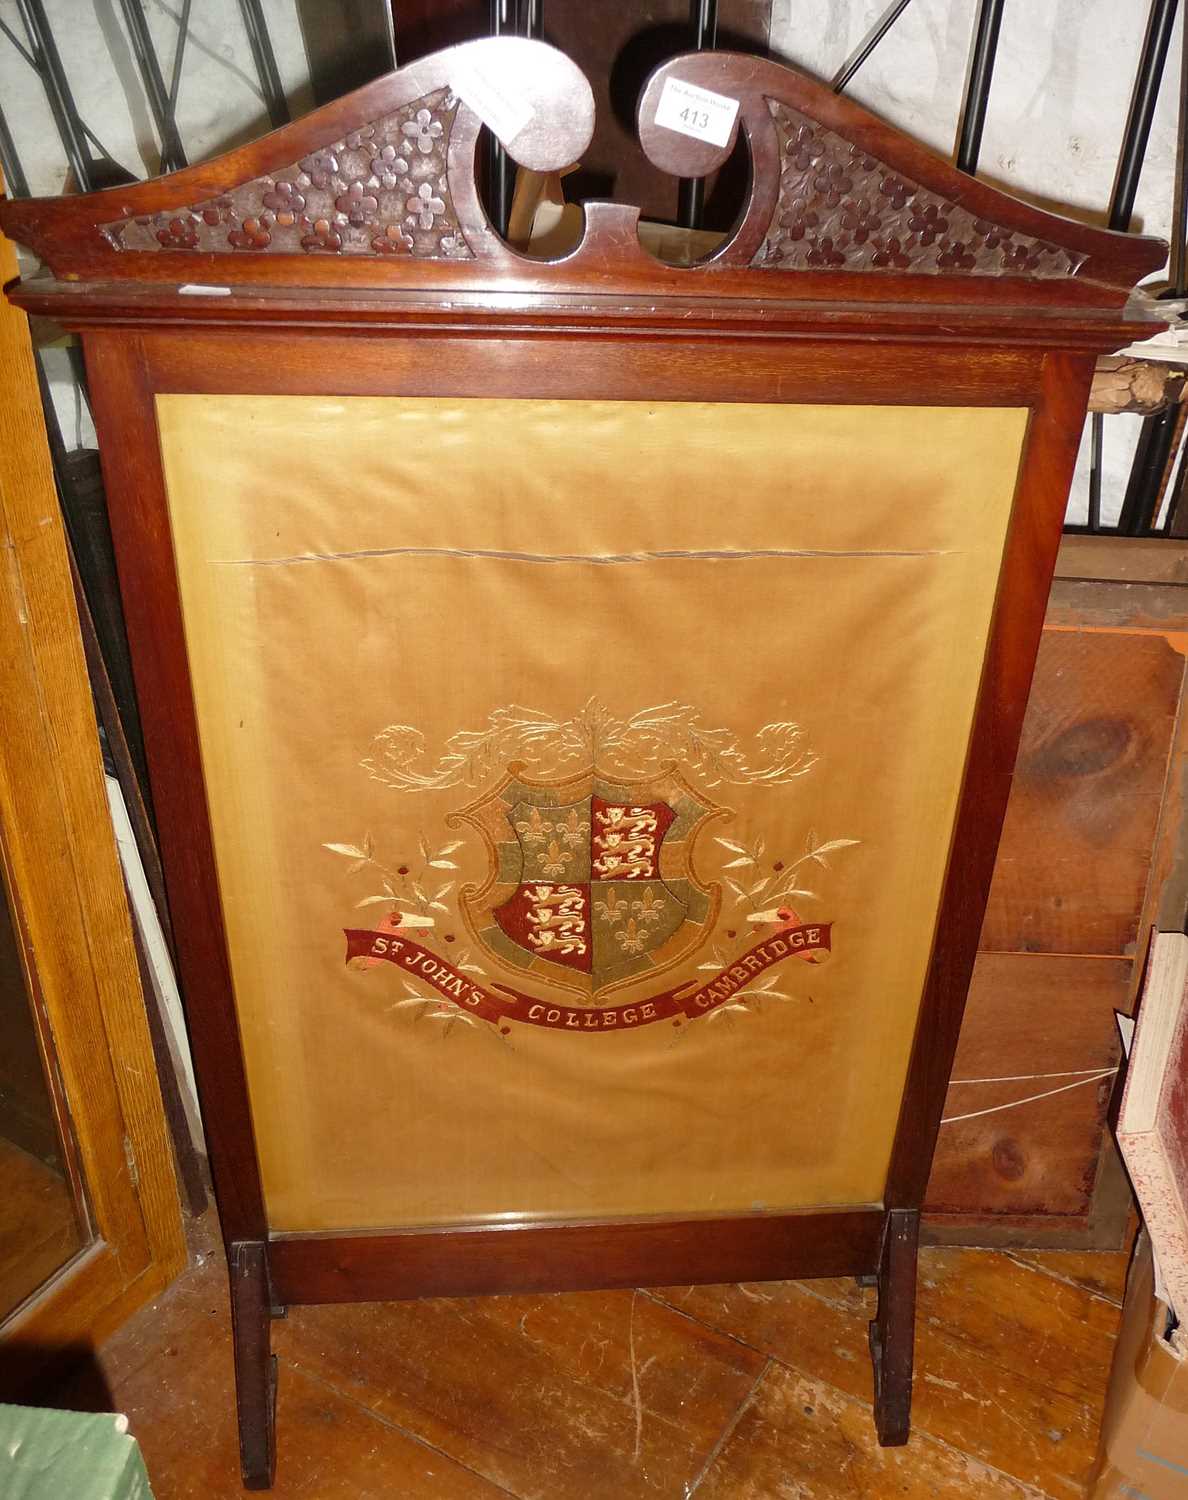 Victorian carved mahogany firescreen with inset embroidered panel "St John's College Cambridge"